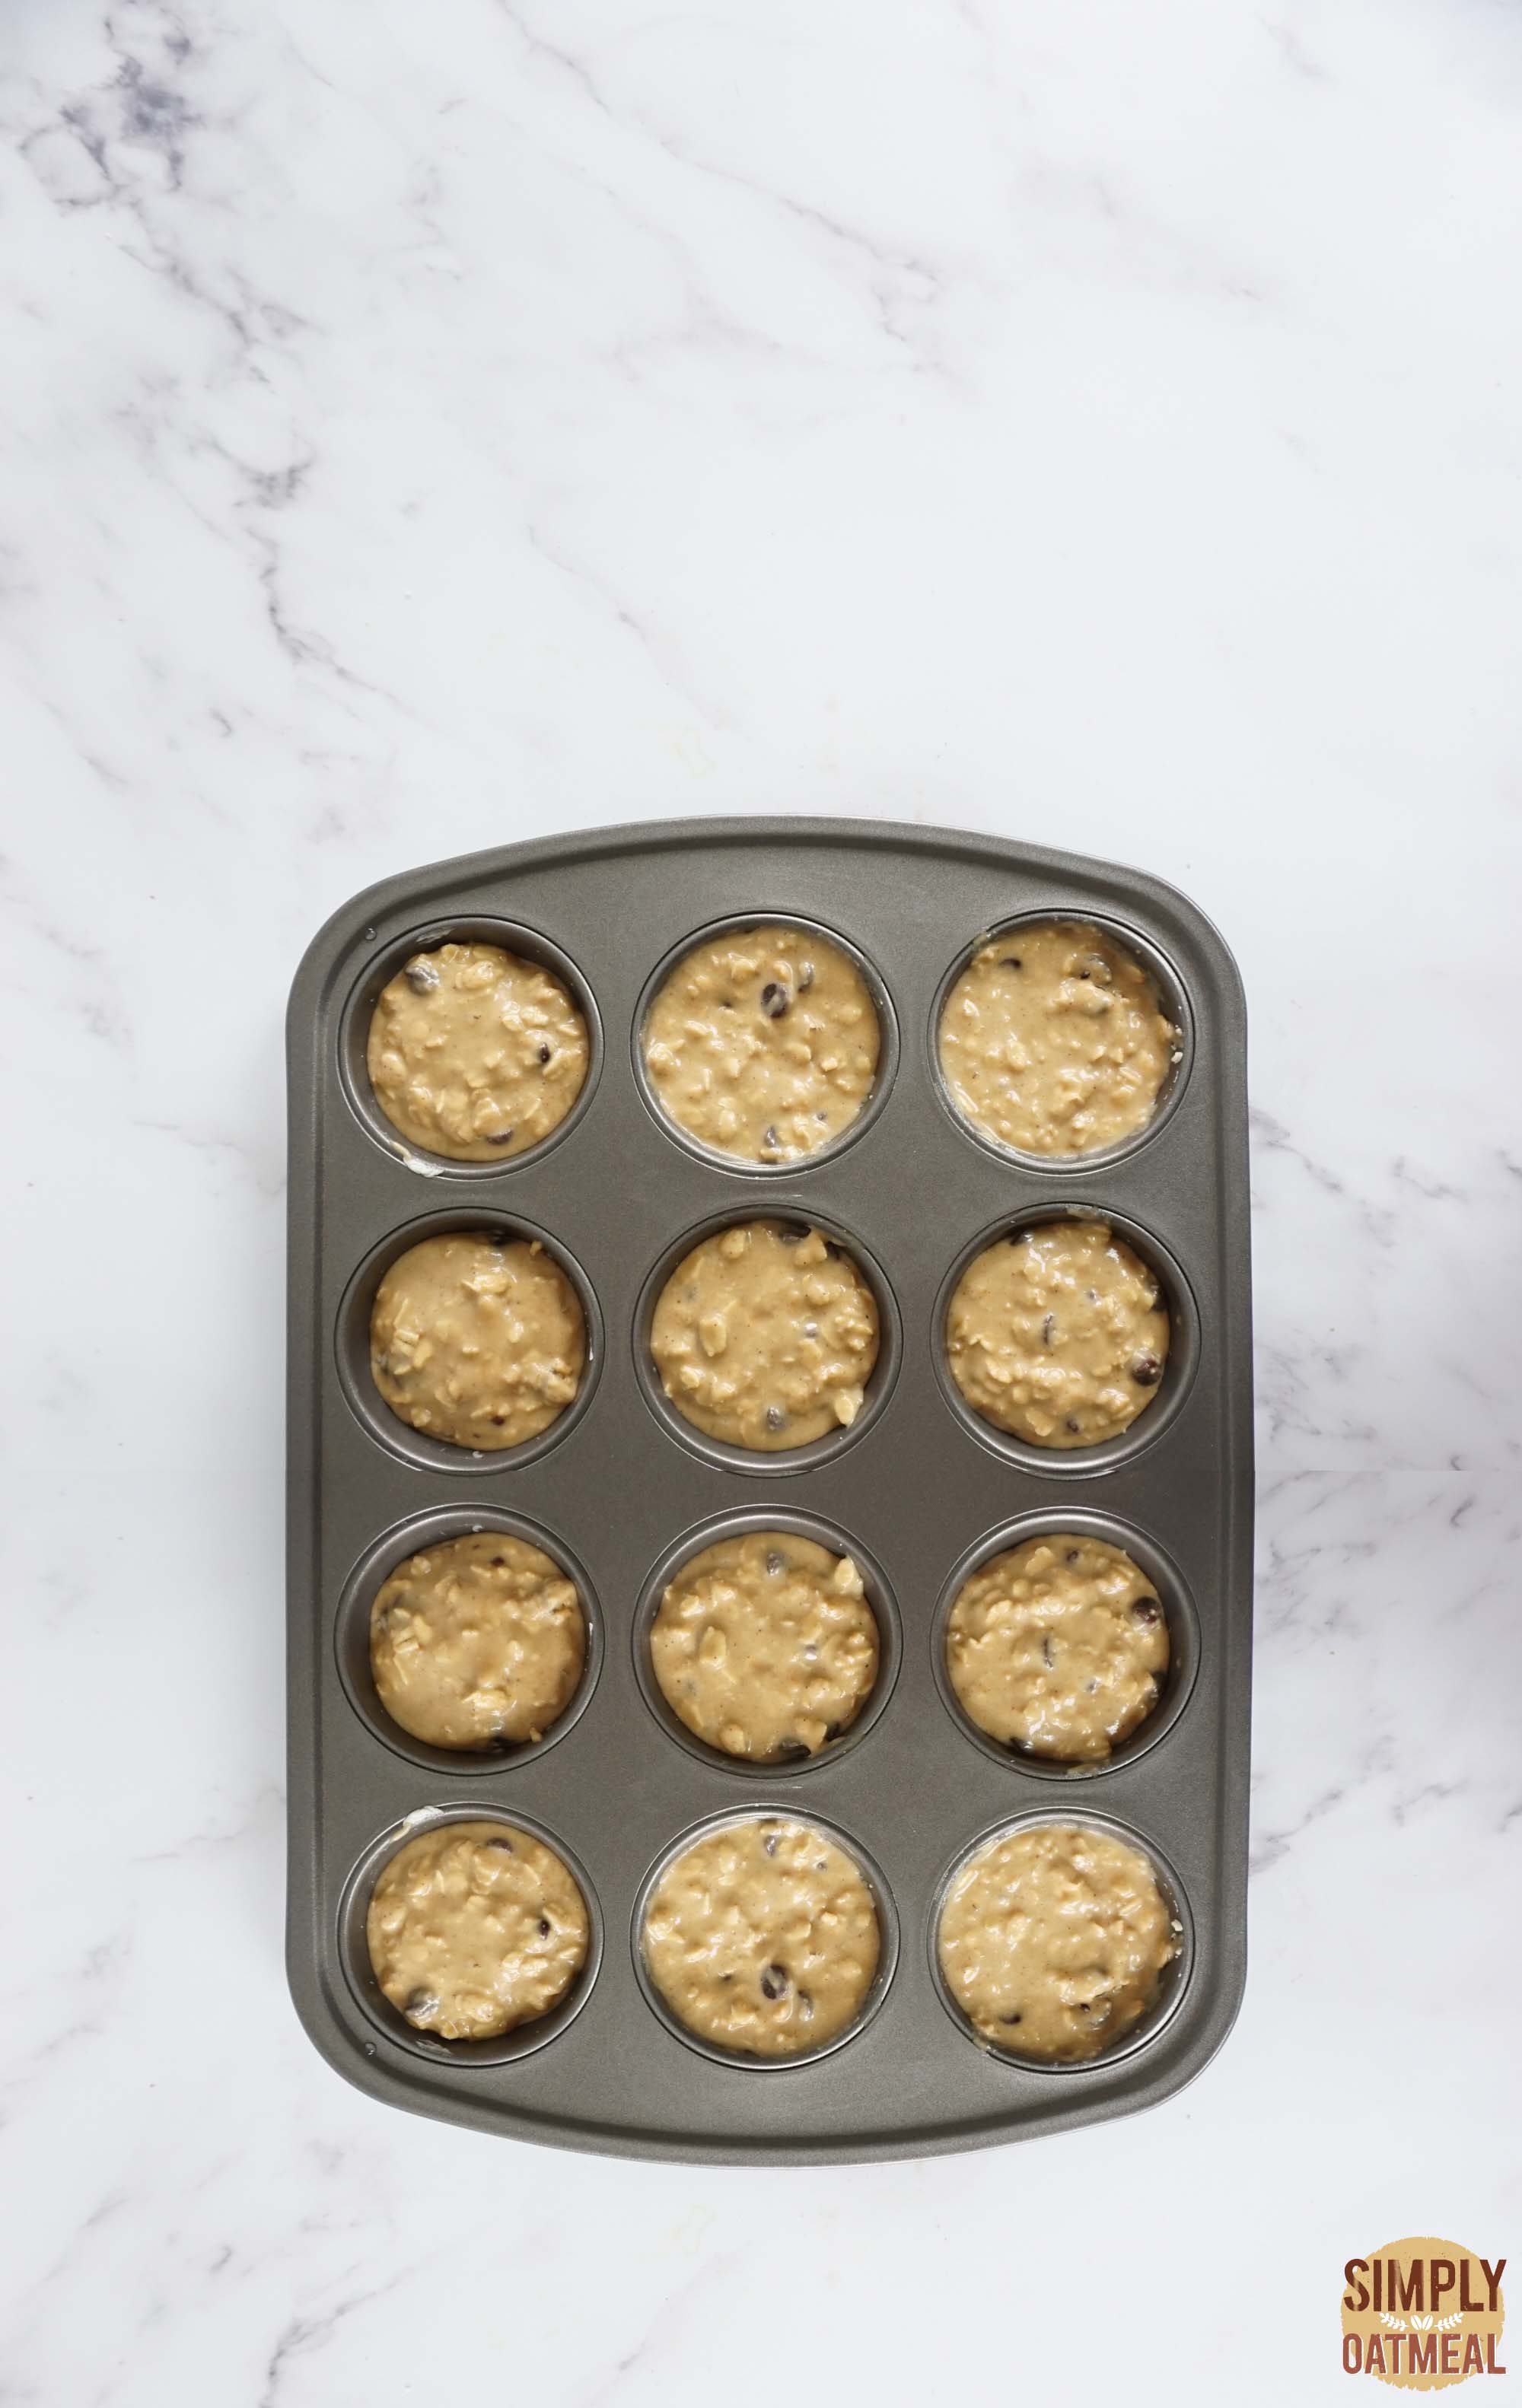 Chocolate chip oatmeal muffins batter in a muffin pan